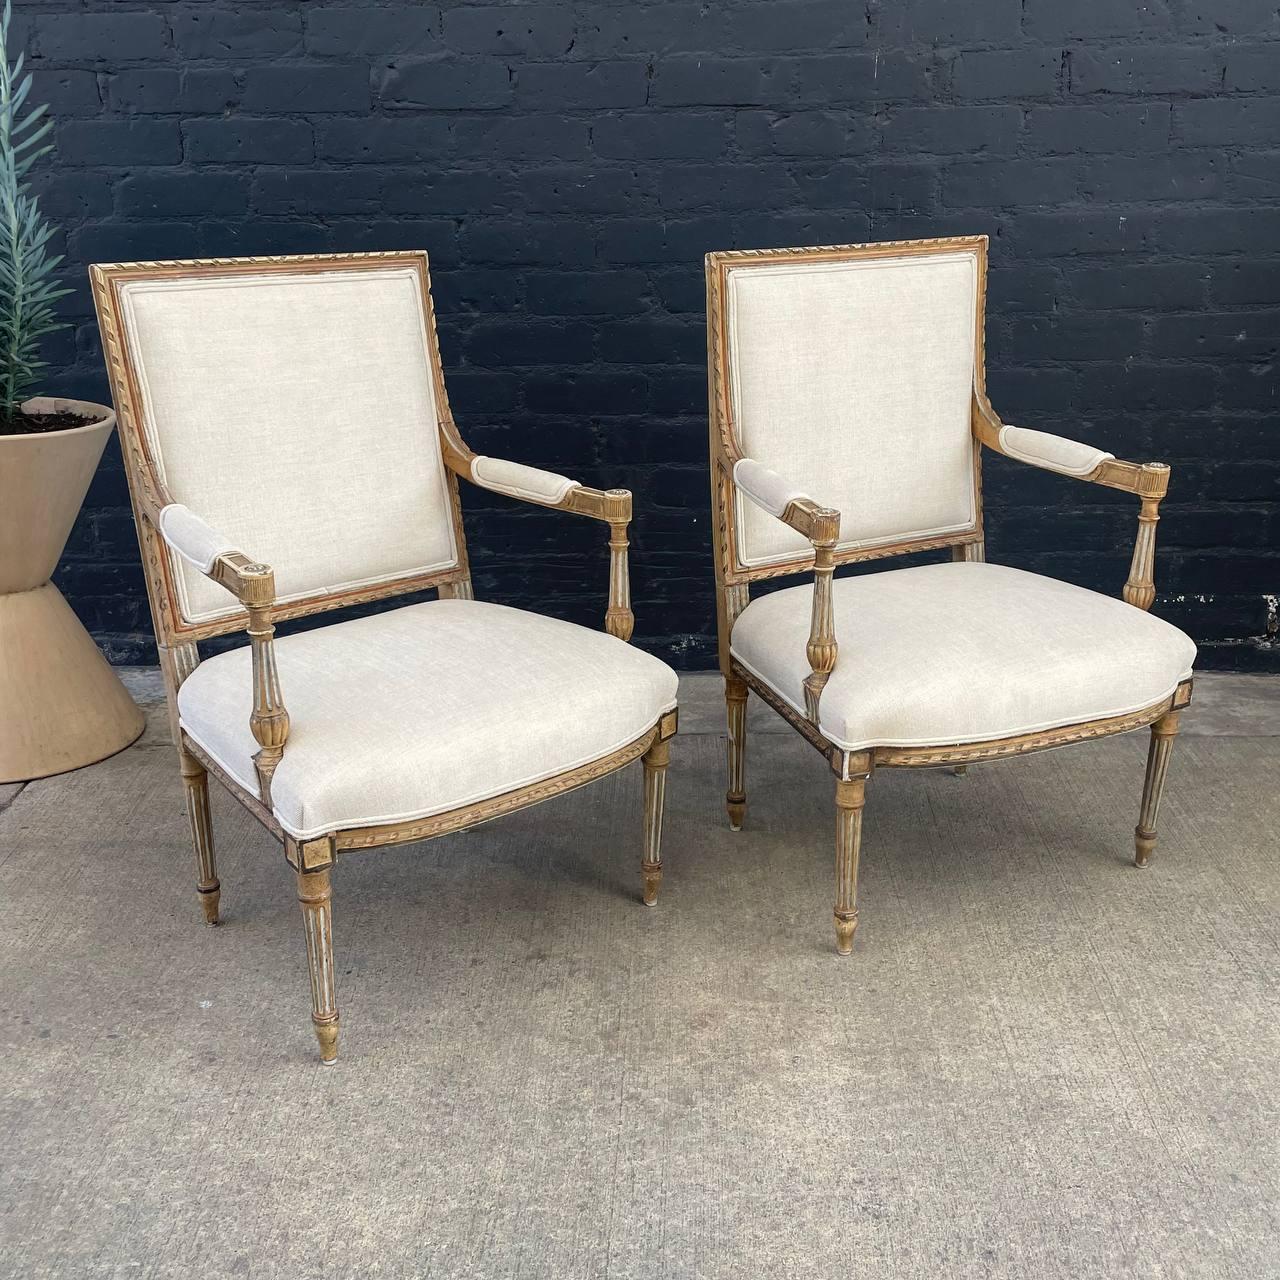 Pair Of French Neoclassical-Style Painted Armchairs 

Country: France 
Materials: Carved-wood, New Fabric
Condition: Newly Reupholstered, Distress Wood
Style: French Neoclassical
Year: 1940’s

Dimensions:
38”H x 24”W x 24”D
Seat Height 17.50”